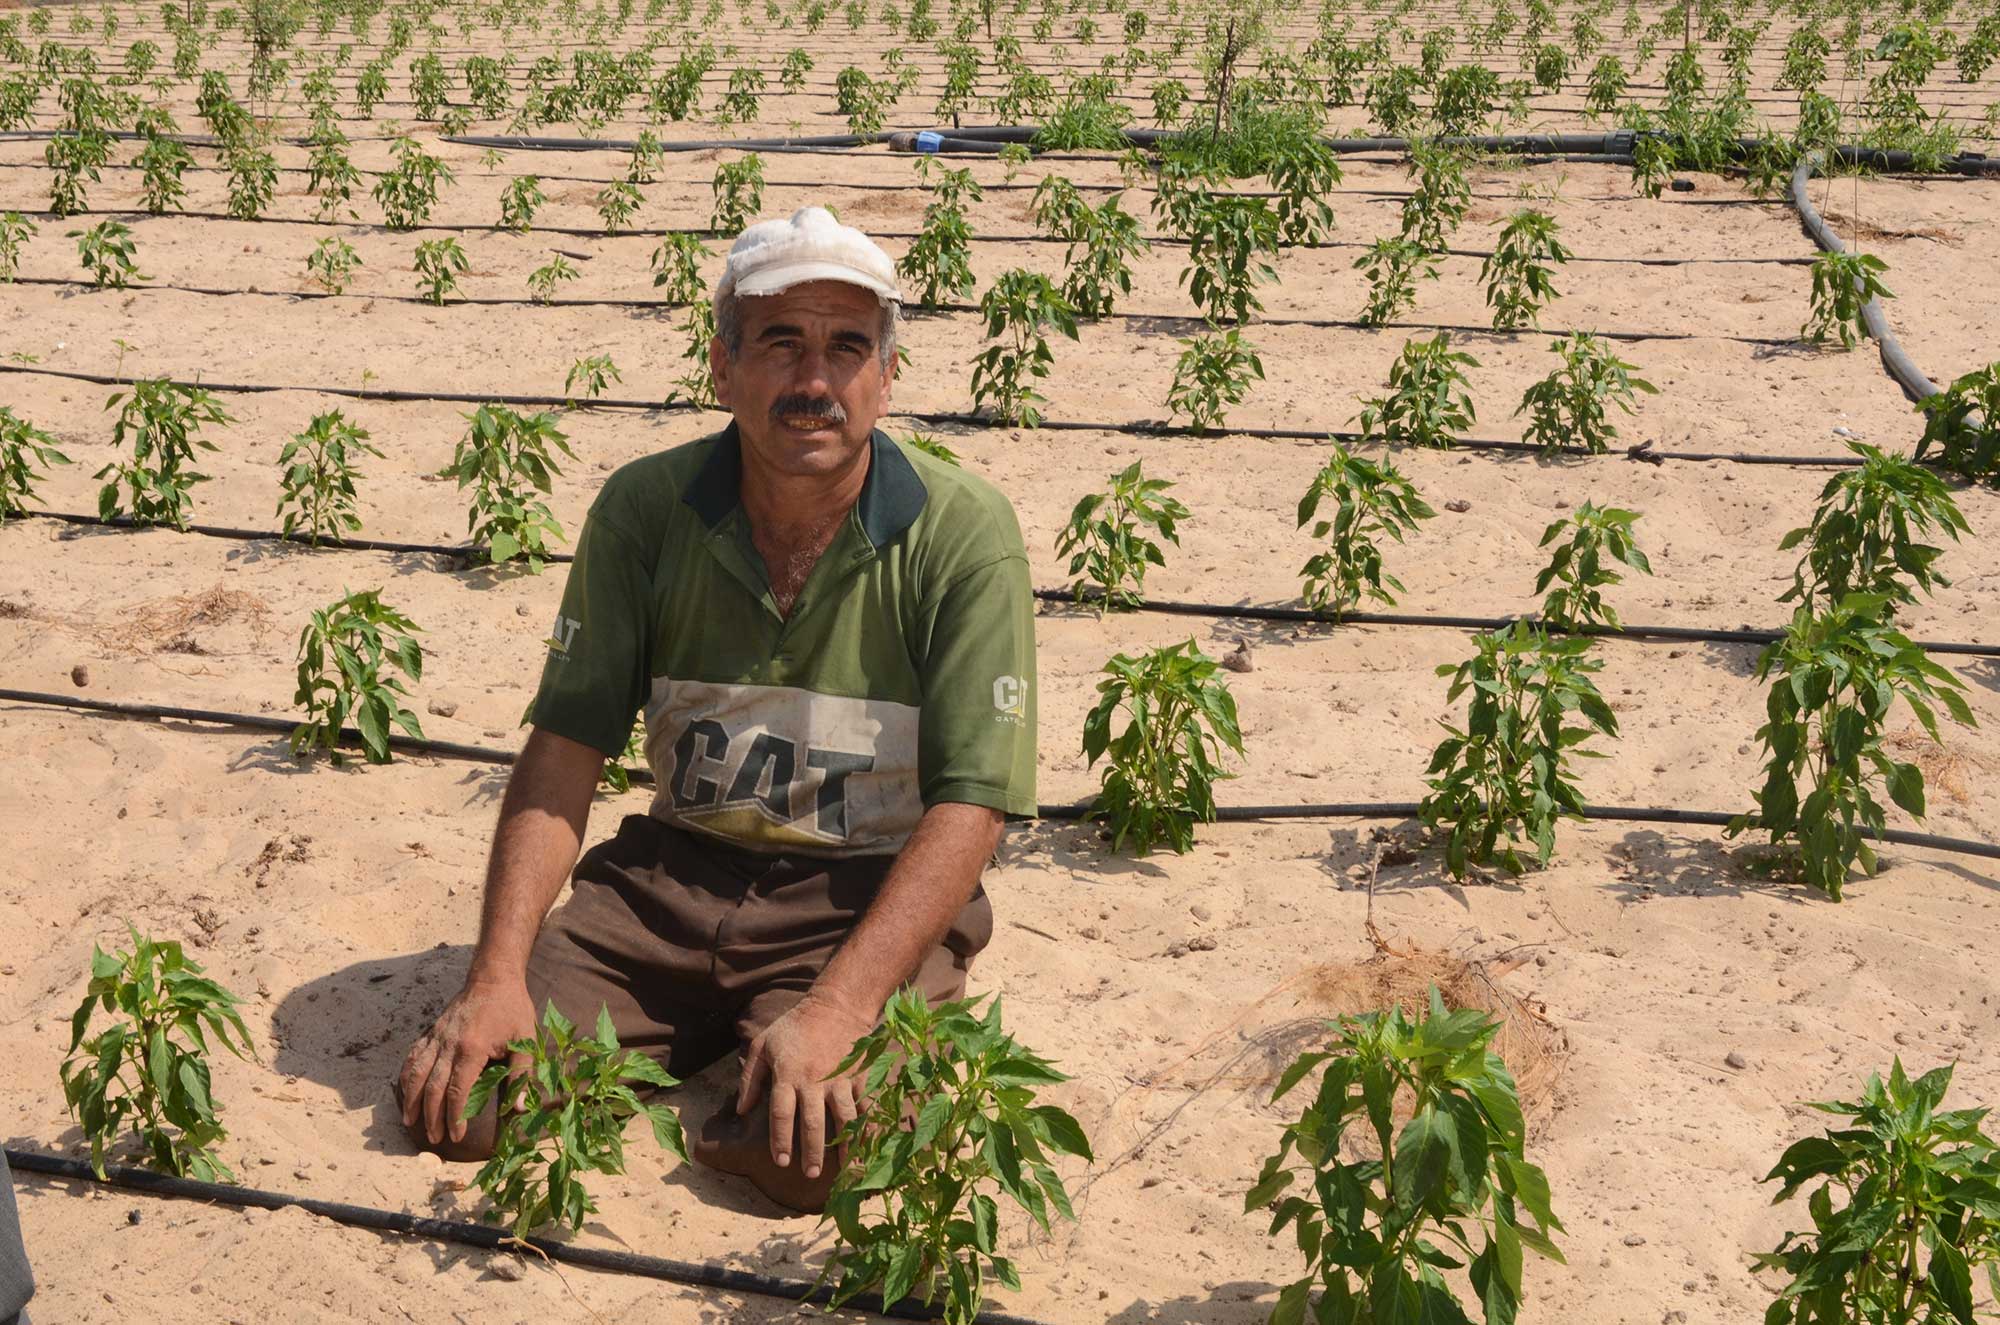 Abu Riyad lost all his crops in the 2014 war. Here he is planting his restored field in August and harvesting in October.